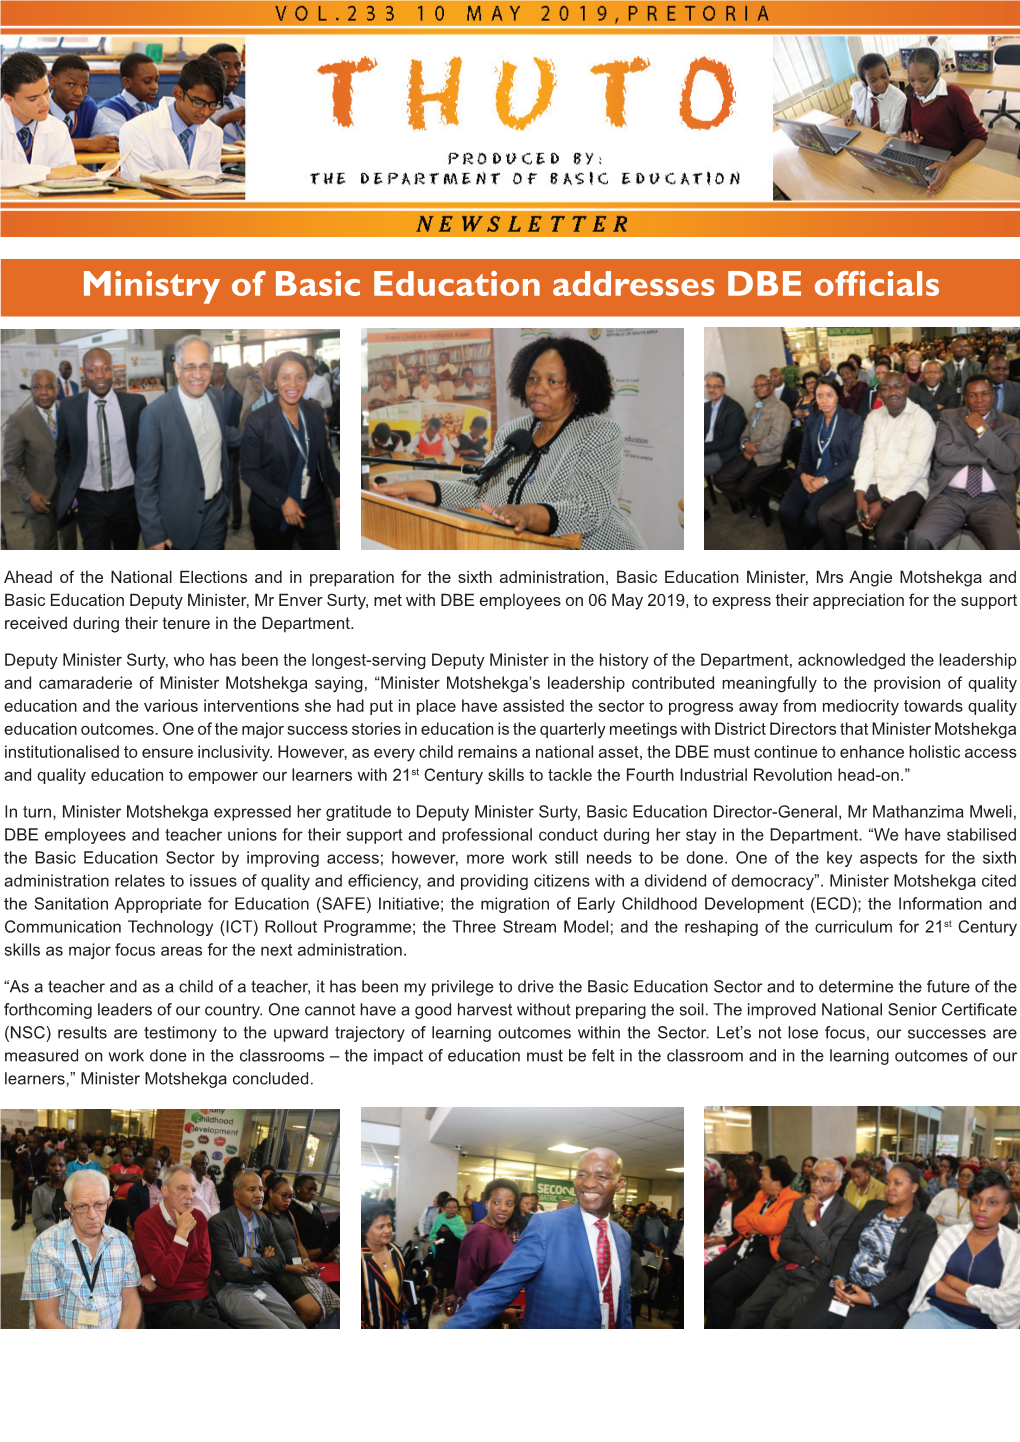 Ministry of Basic Education Addresses DBE Officials